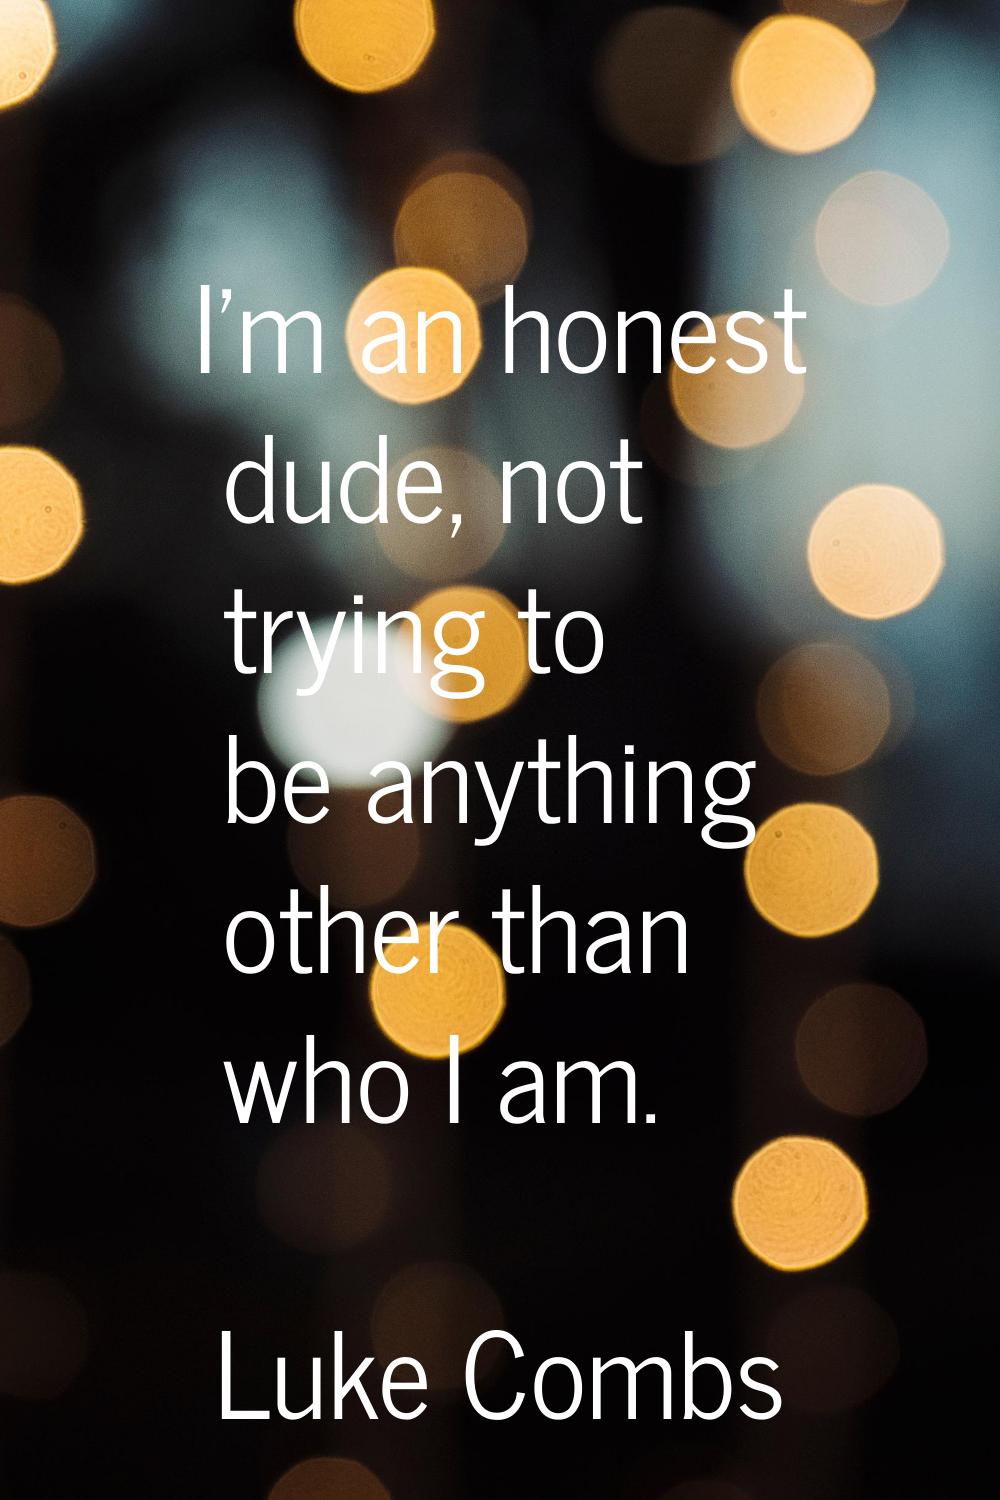 I'm an honest dude, not trying to be anything other than who I am.